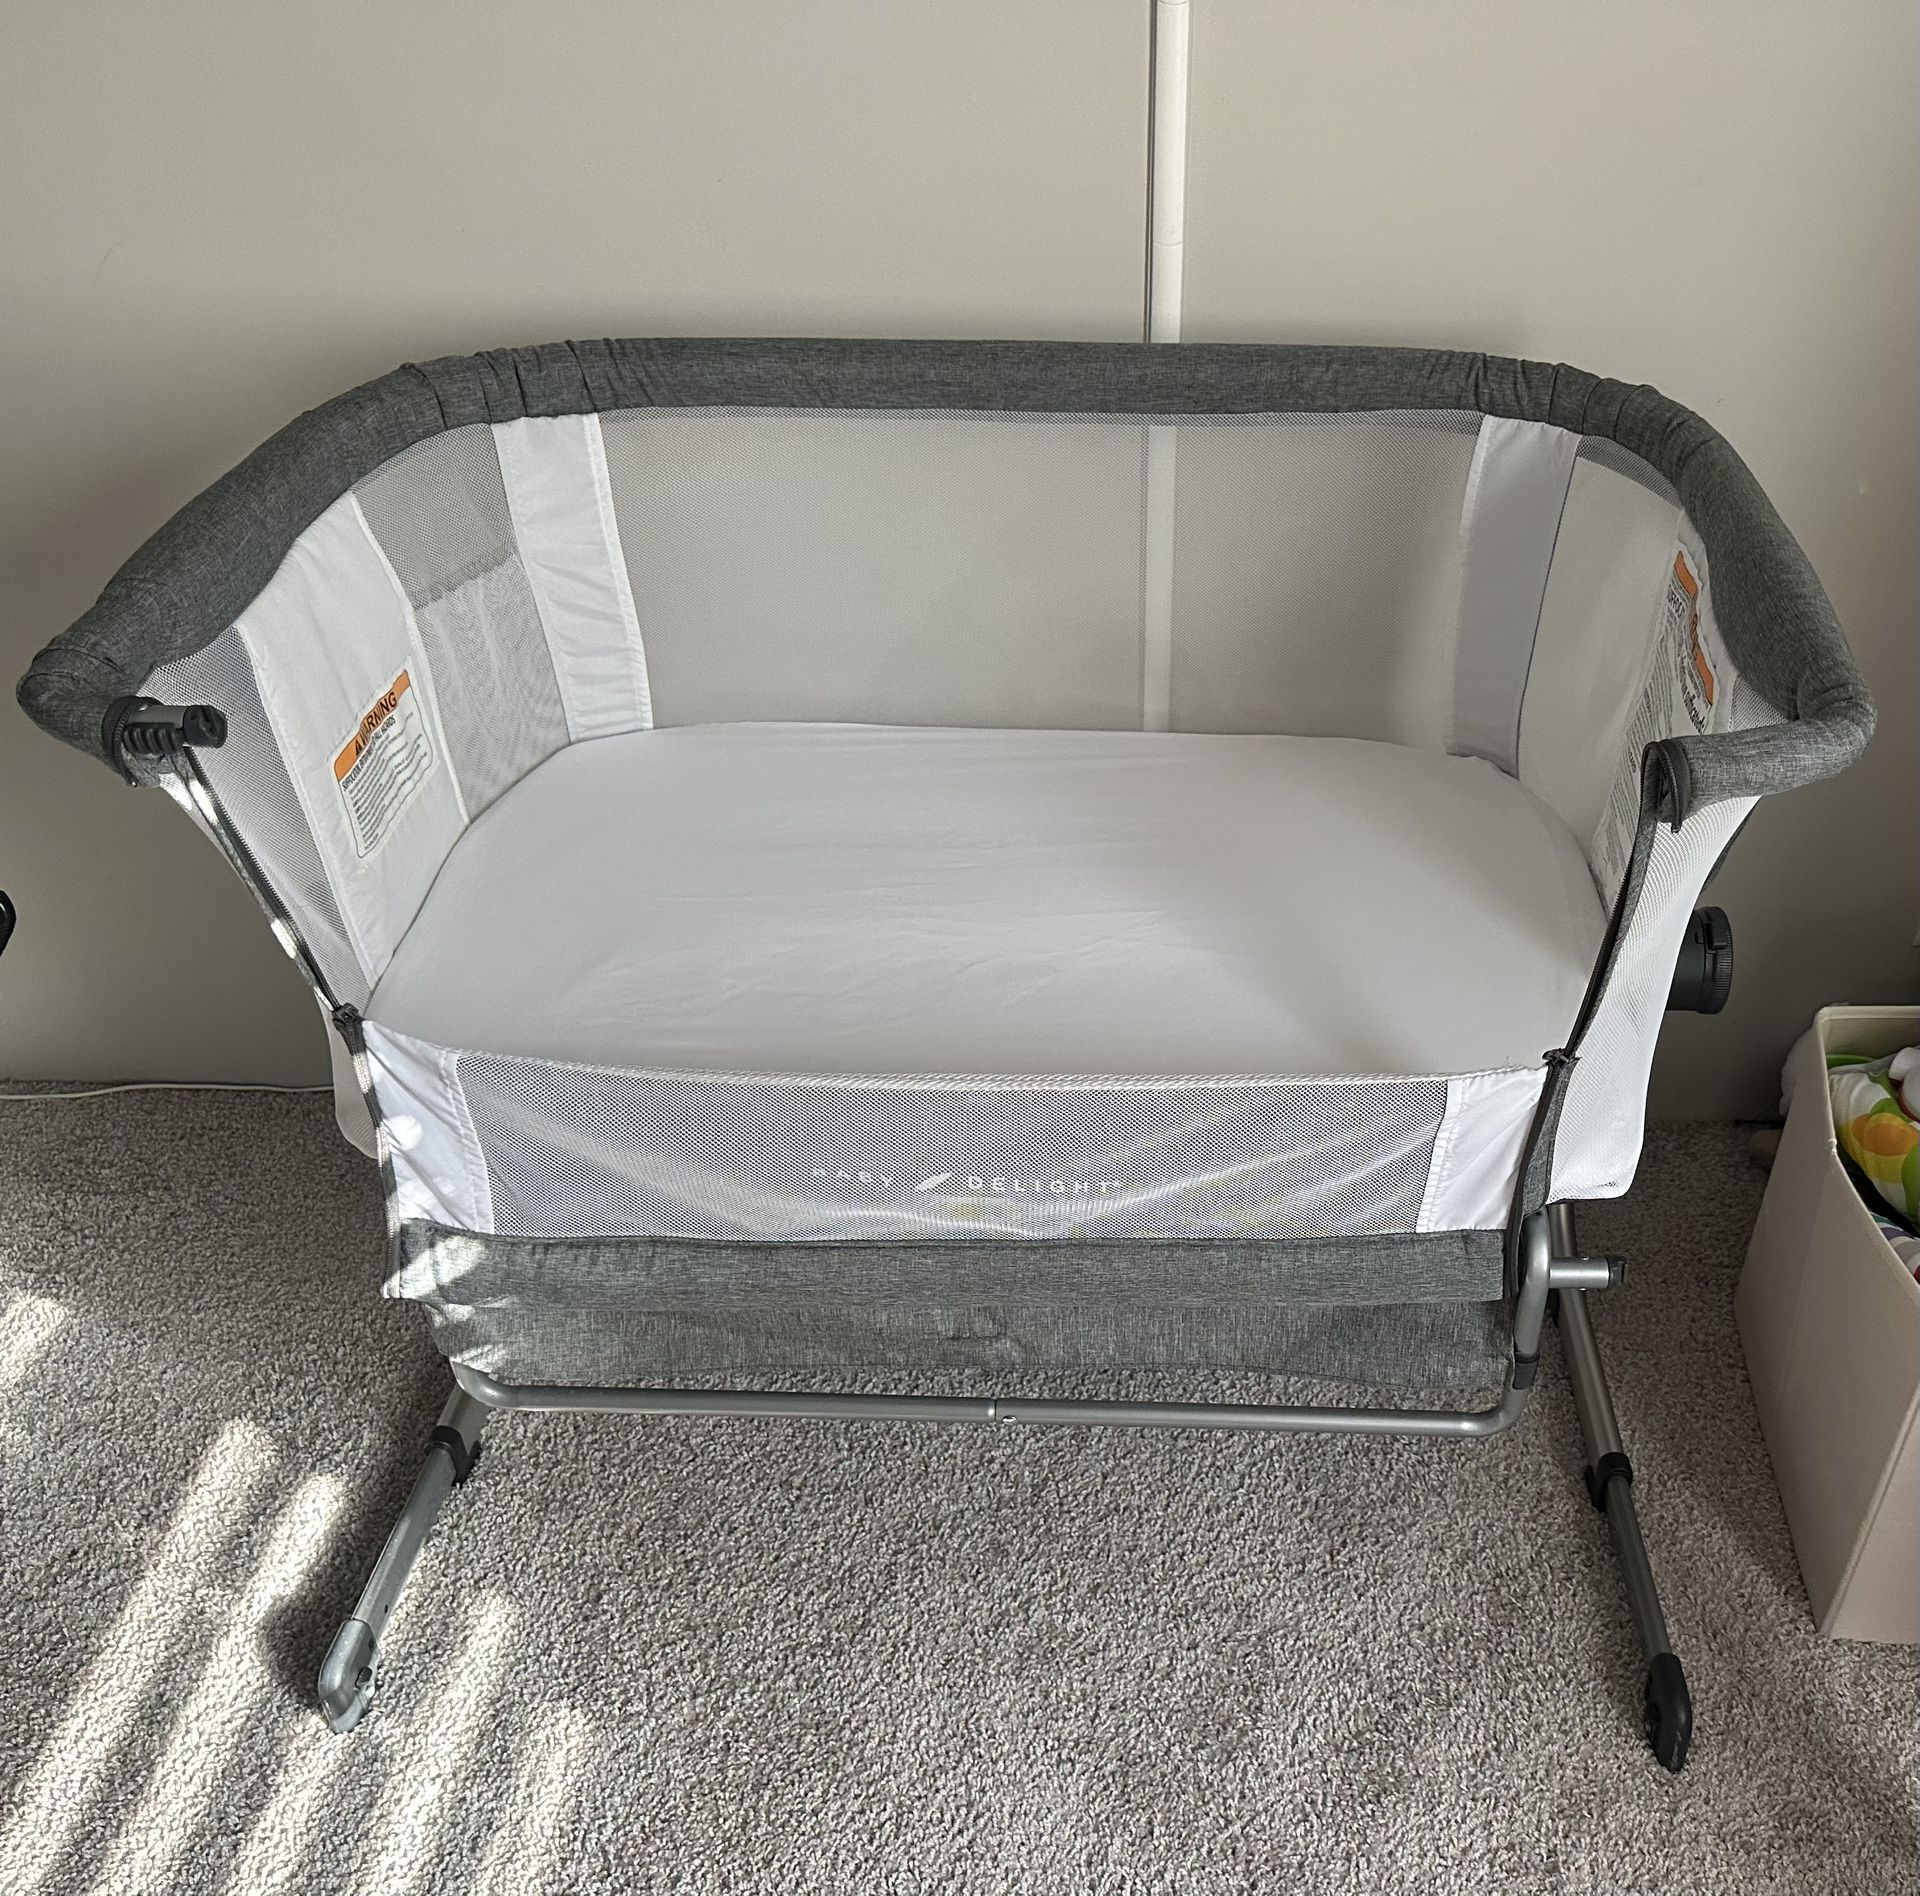 Barely used Bassinet, Activity Play Mat, Floor Seat, & Bouncers. Willing to sell individually too!